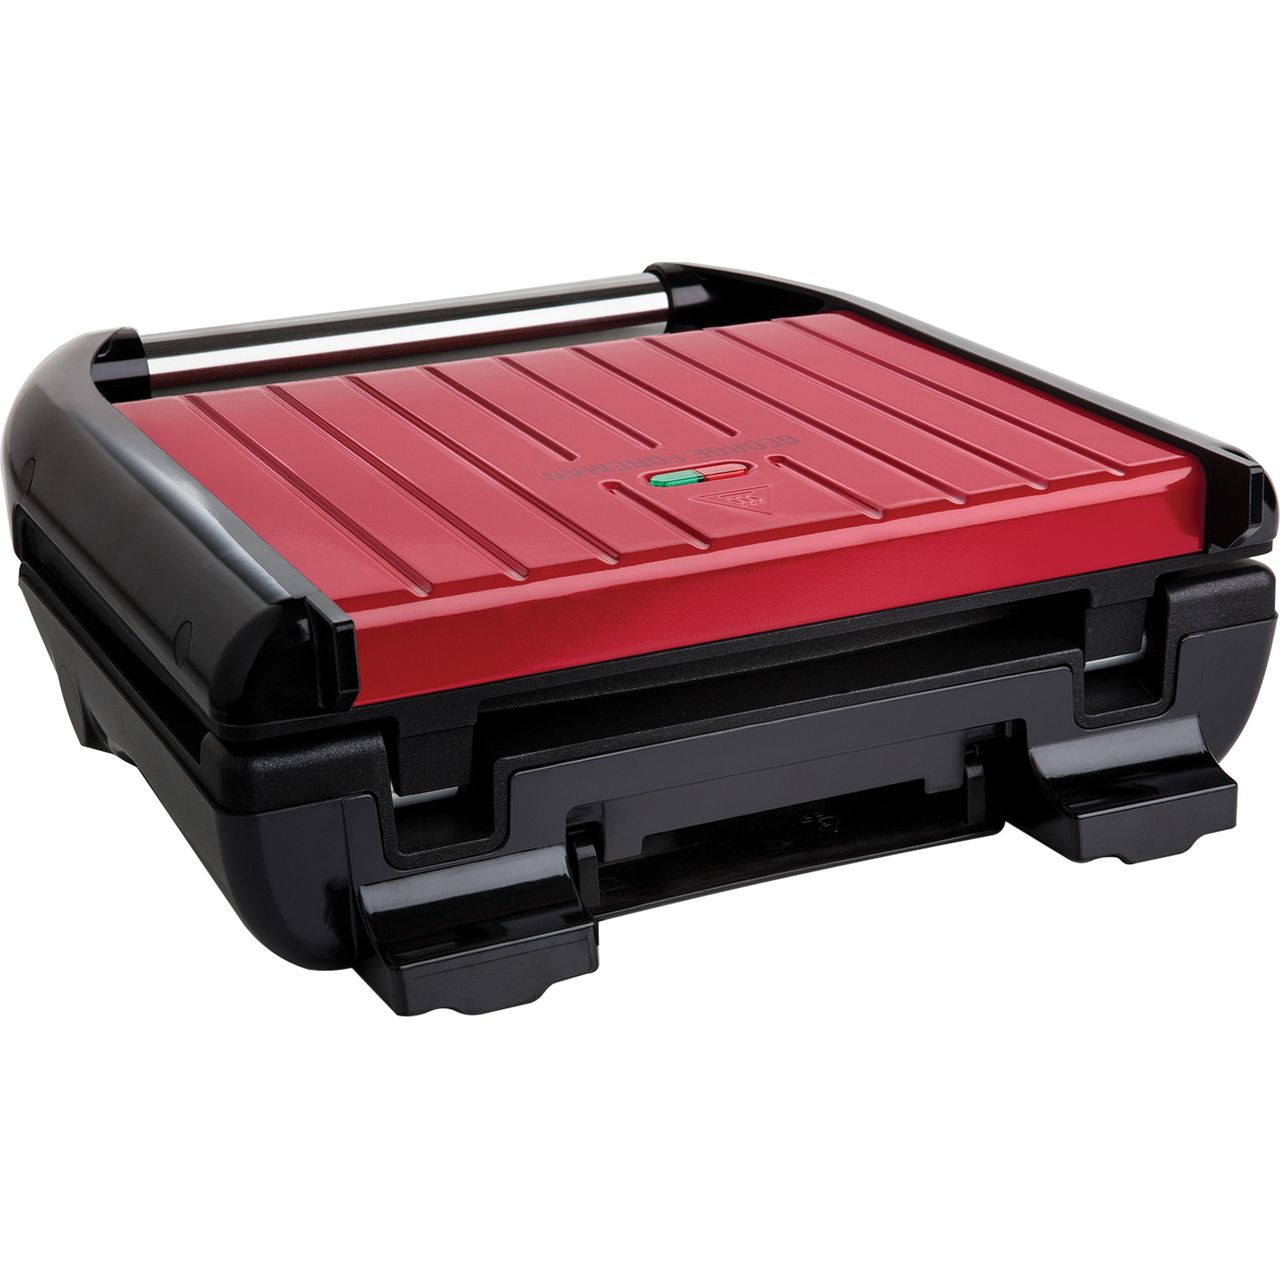 George Foreman 7 Portion 25050 Health Grill Review